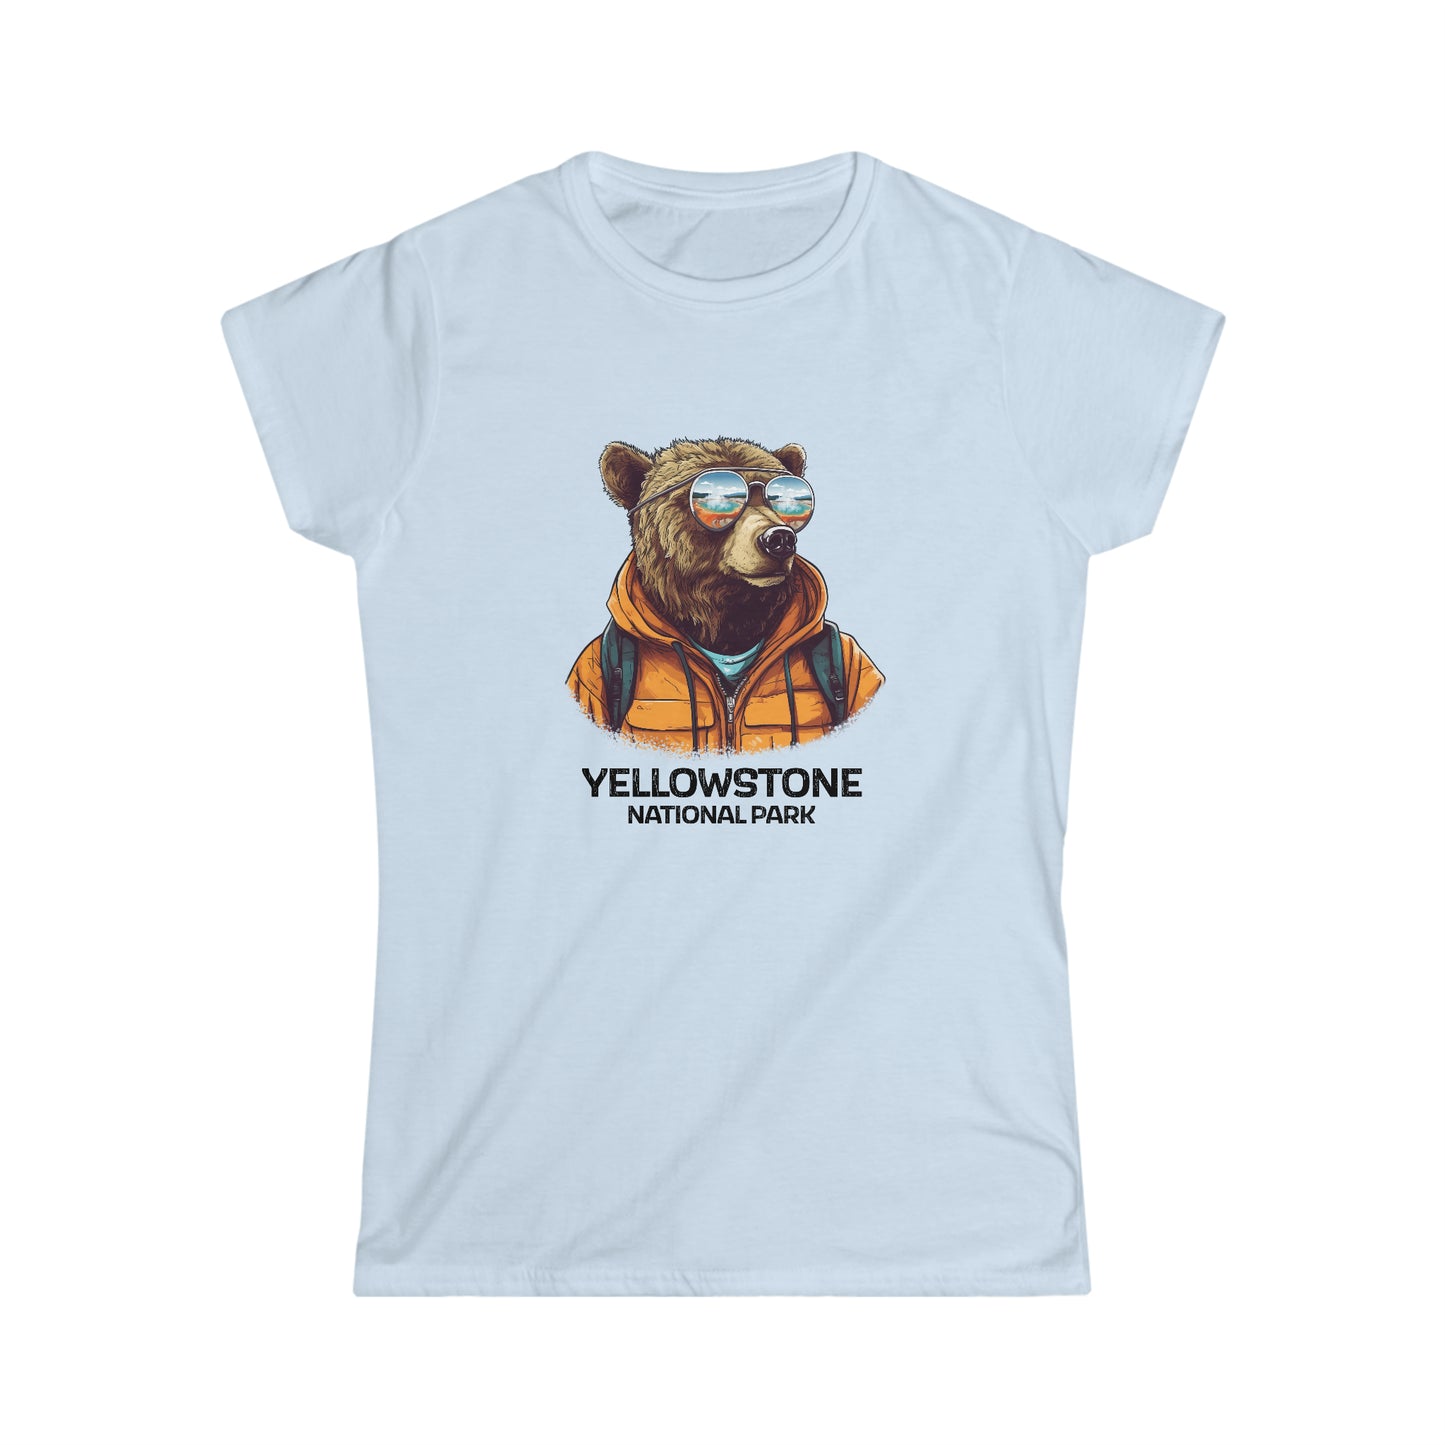 Yellowstone National Park Women's T-Shirt - Cool Grizzly Bear